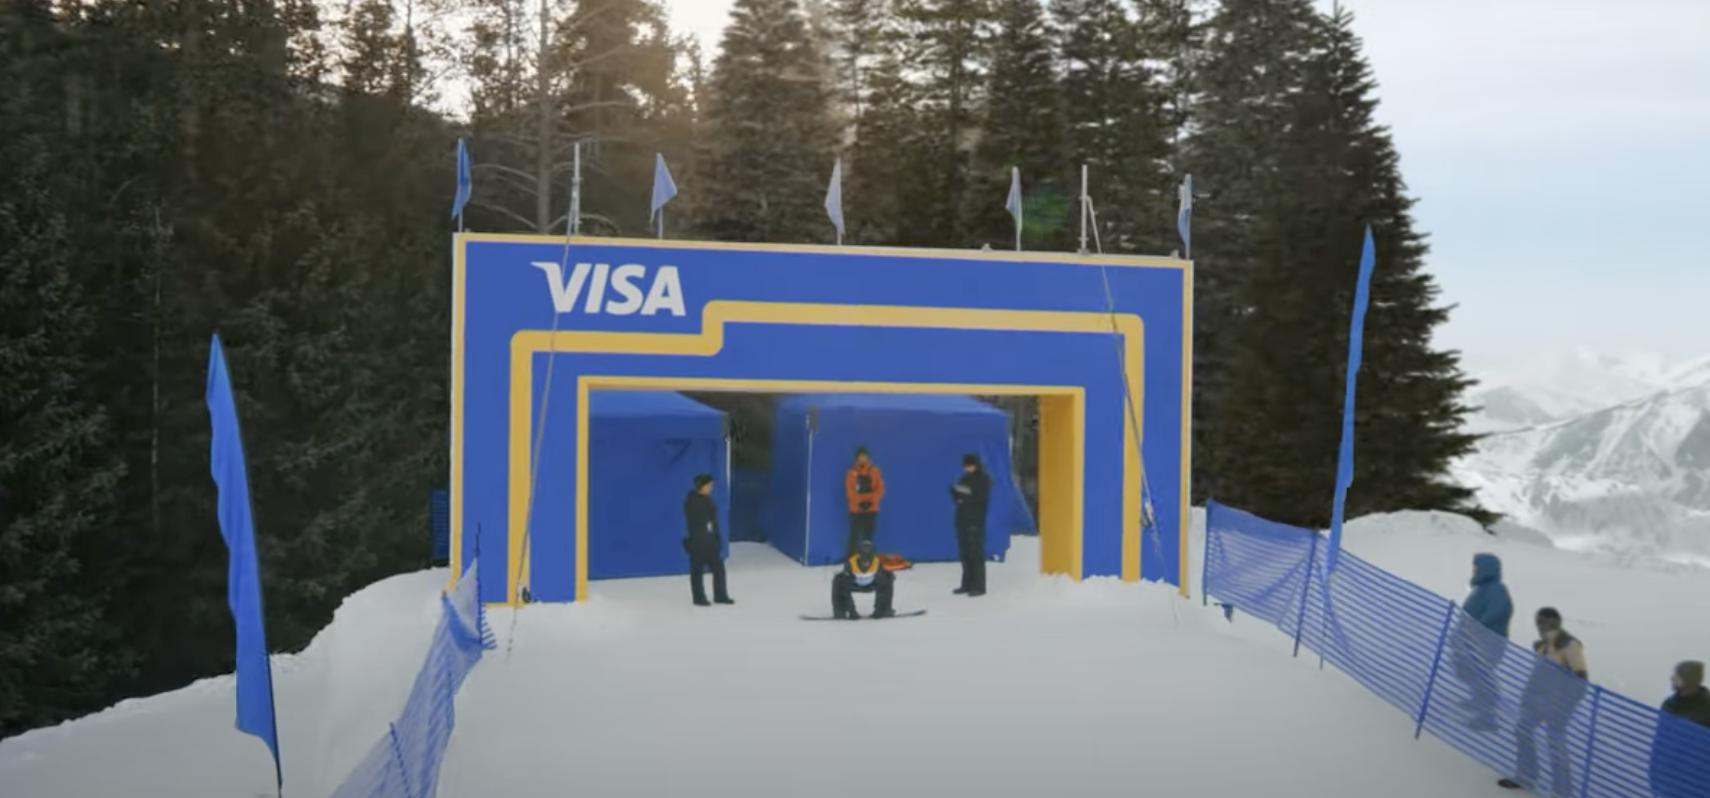 Here's the full song from Visa's 2022 Olympics commercial, you're